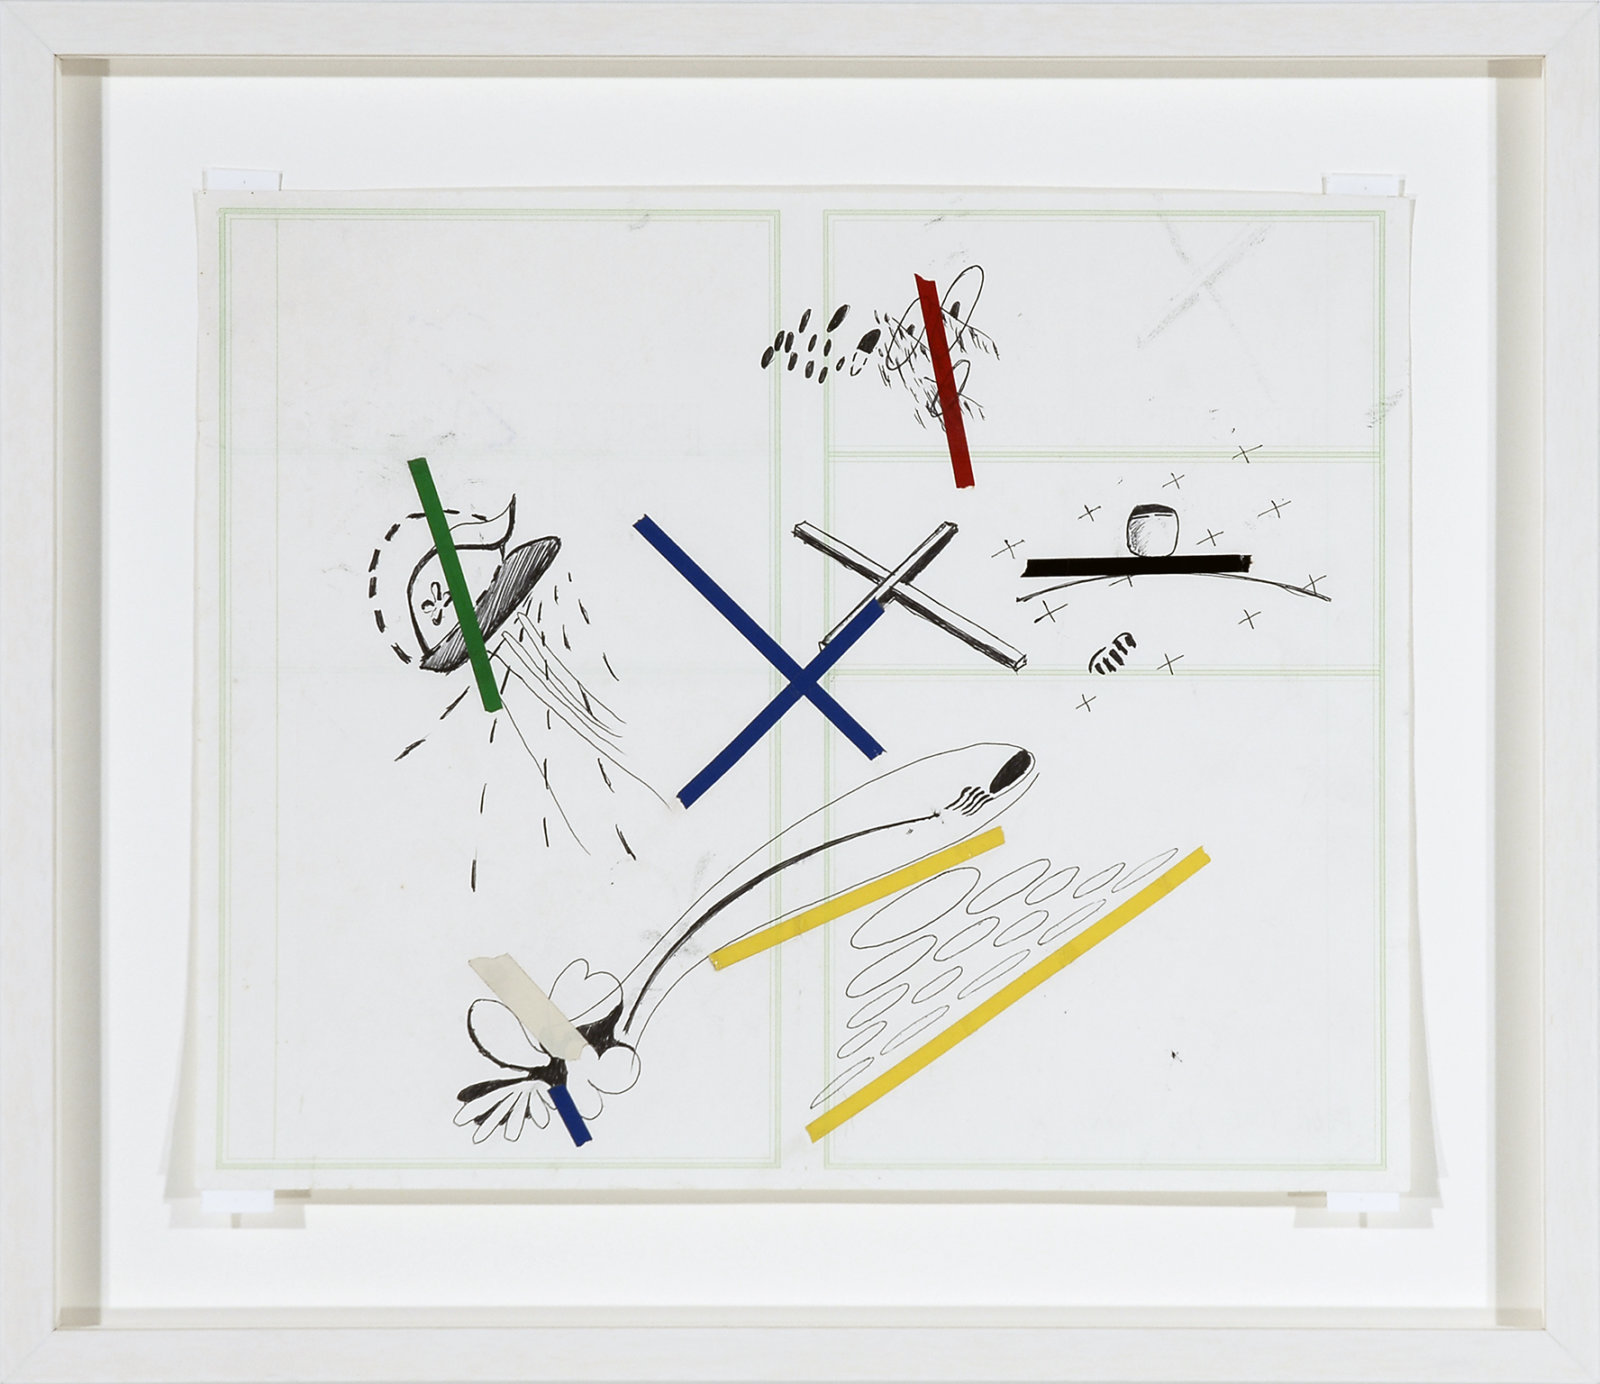 Jerry Pethick, Quadrant Reverse, Four Time, Pictures, 1972, paper, tape, ink, 19 x 22 in. (48 x 56 cm)